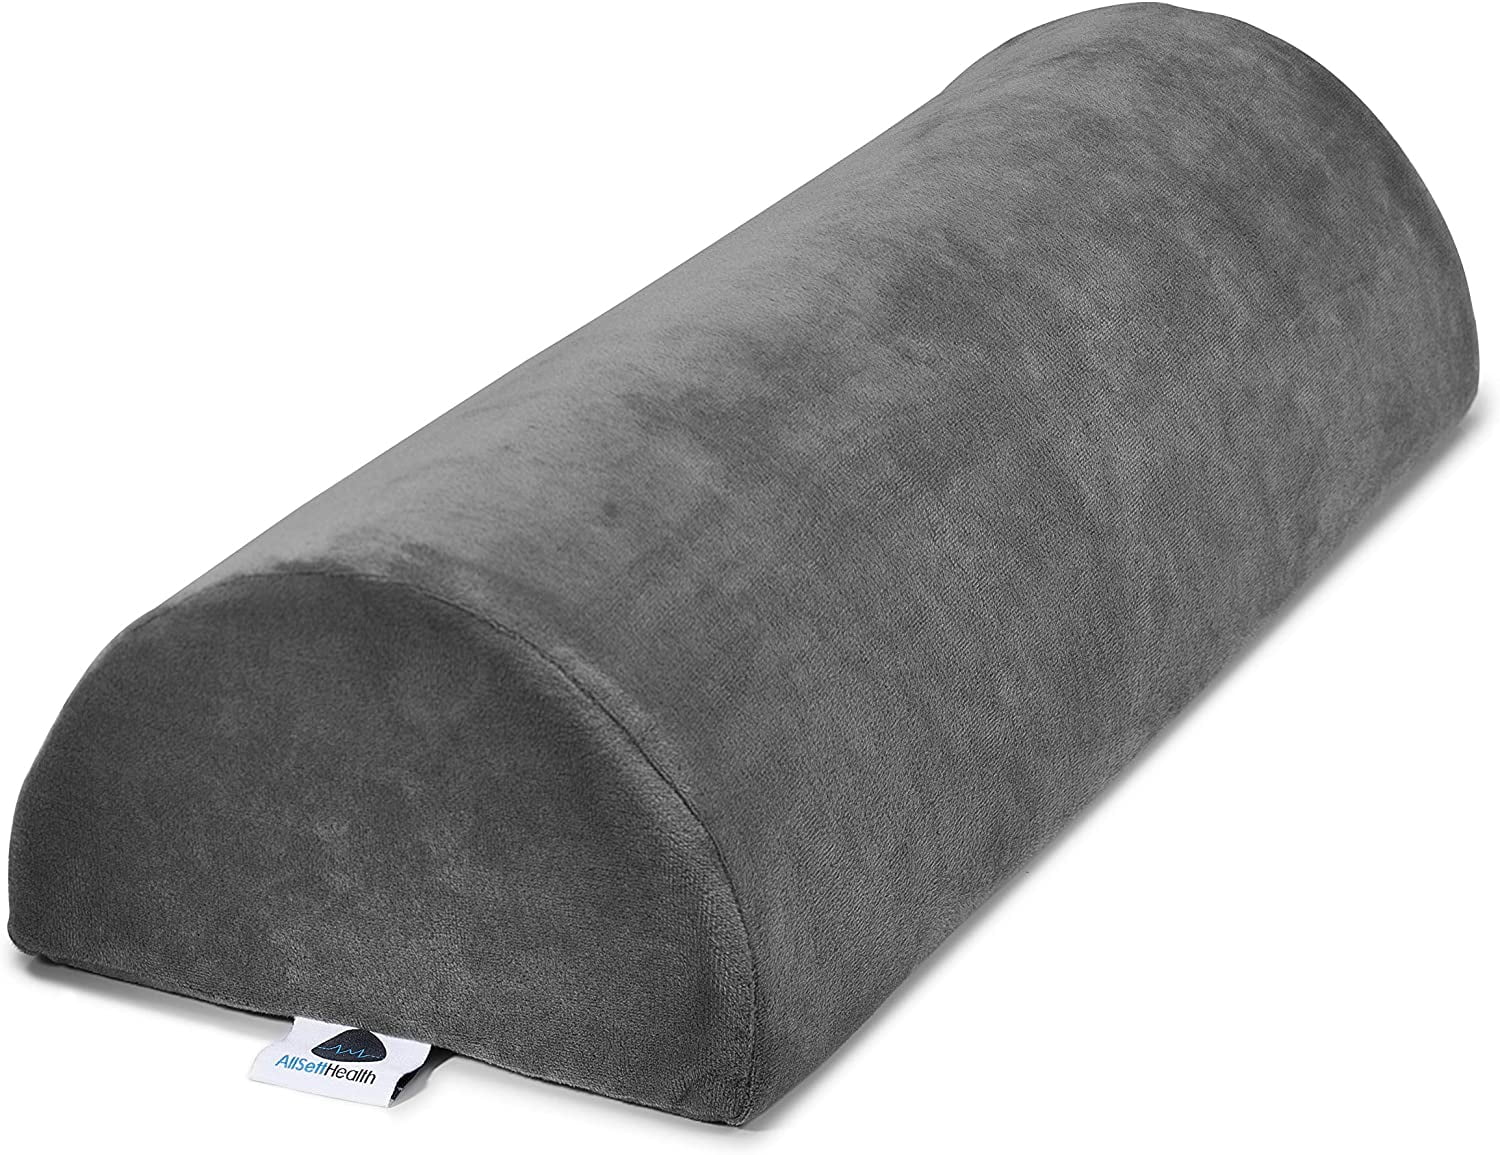 Cylinder Bolster Round Roll Cervical Pillow for Neck Lumbar Leg Knee Bed Sofa 